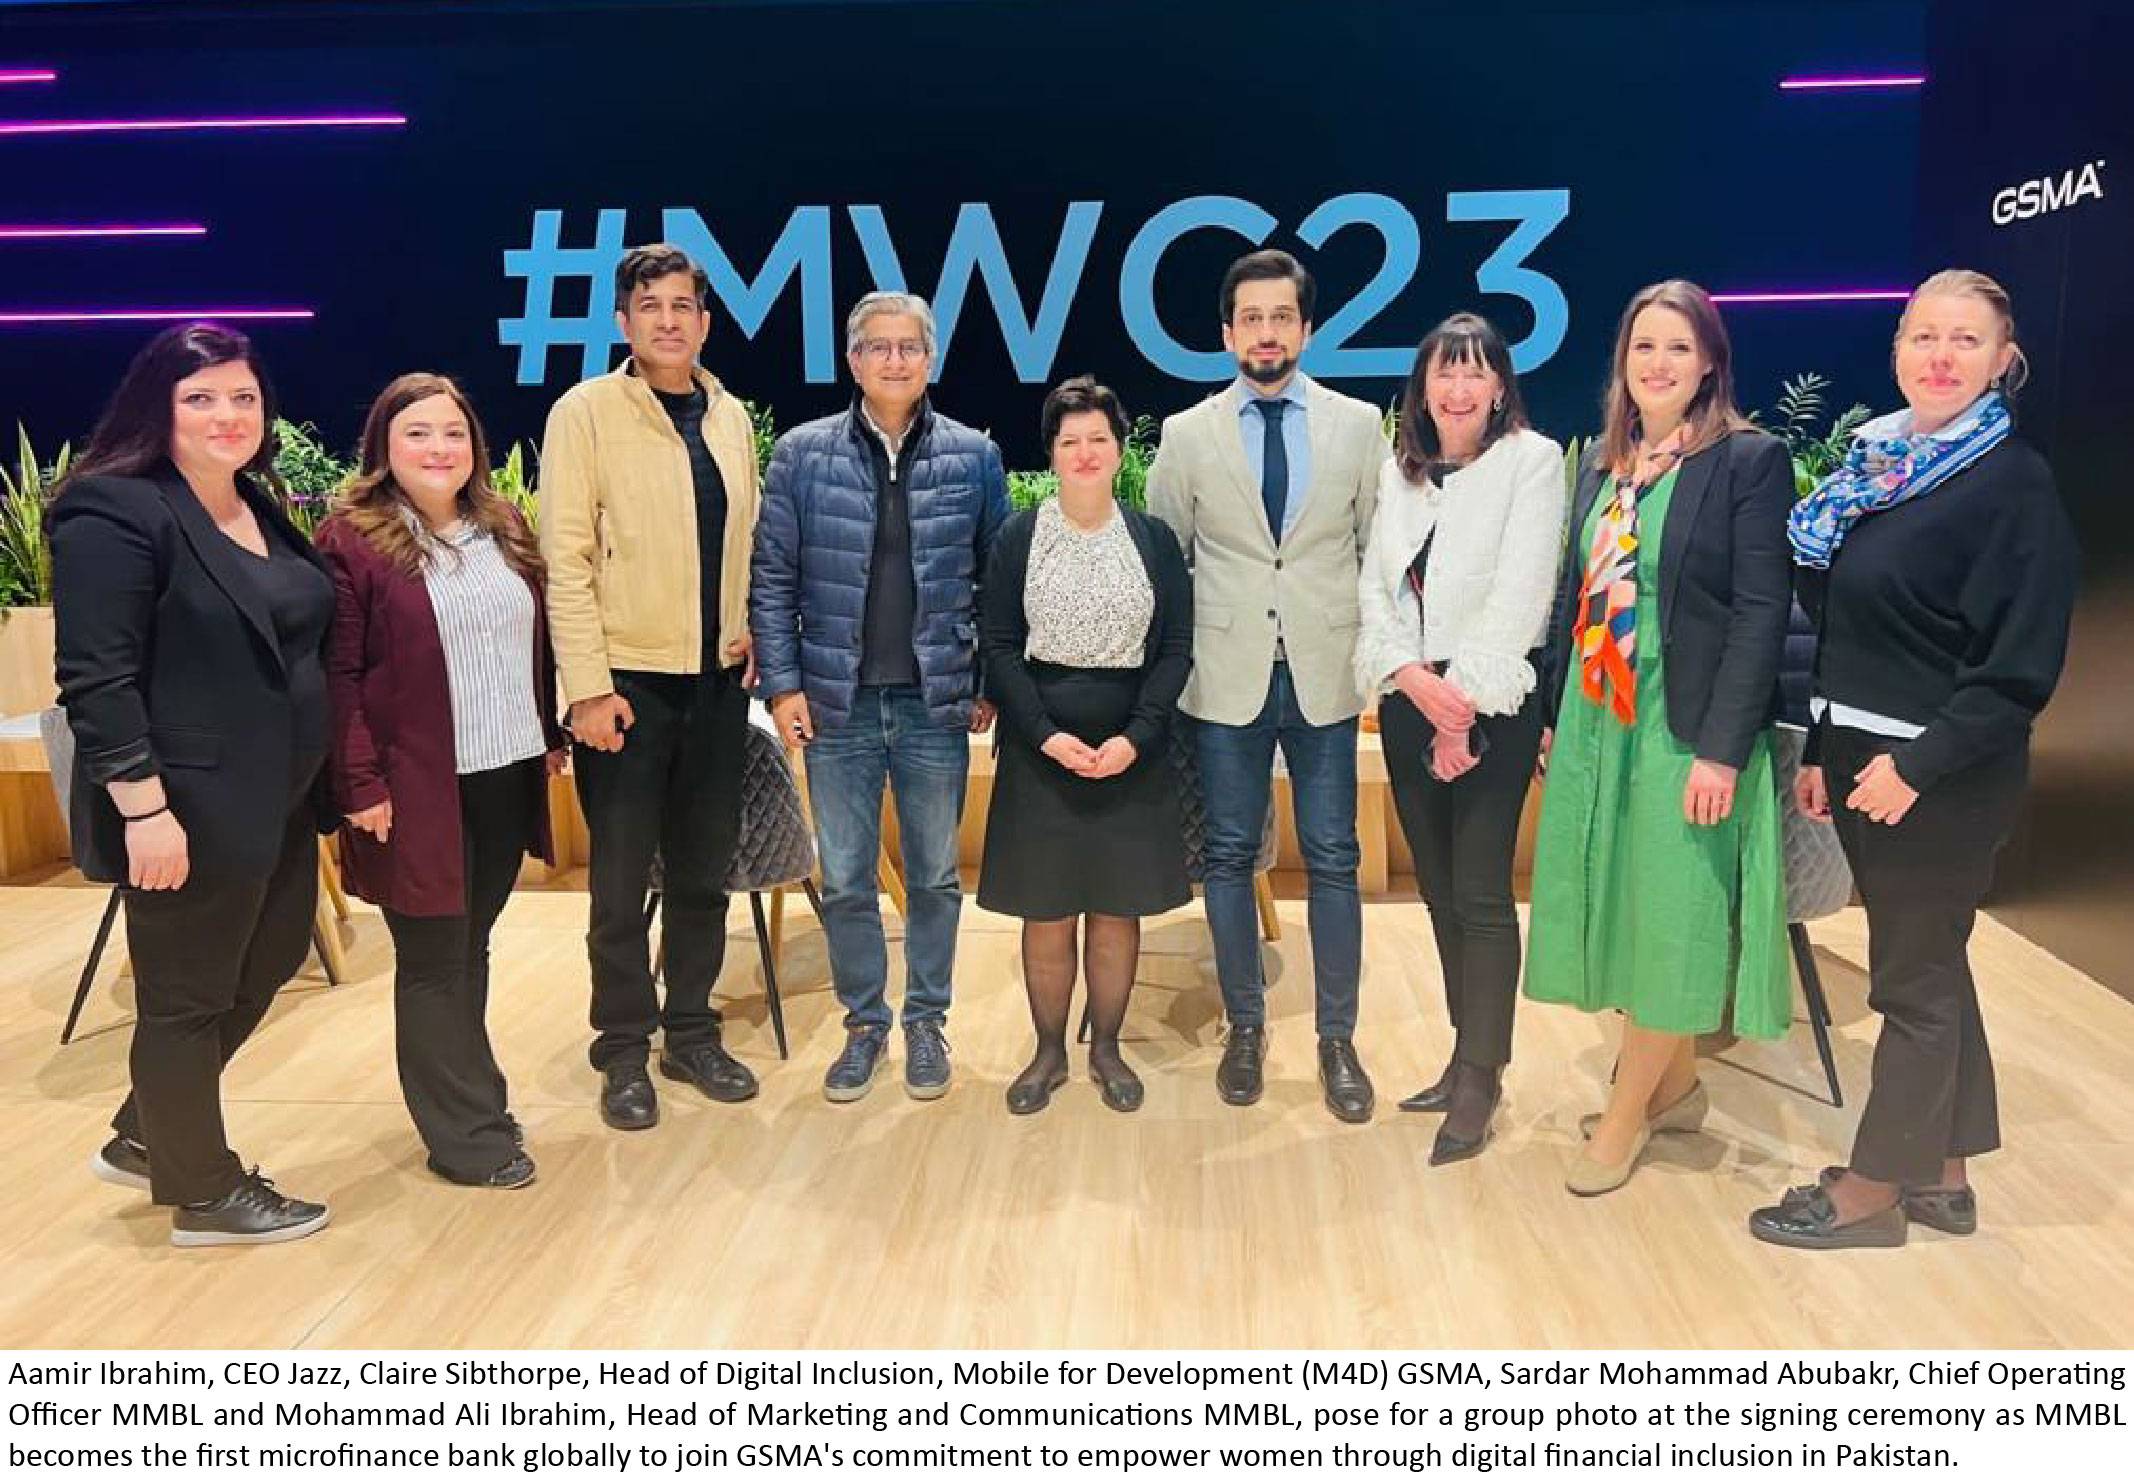 VEON’s Mobilink Bank Becomes First Microfinance Bank Globally to Join the GSMA Connected Women Commitment Initiative